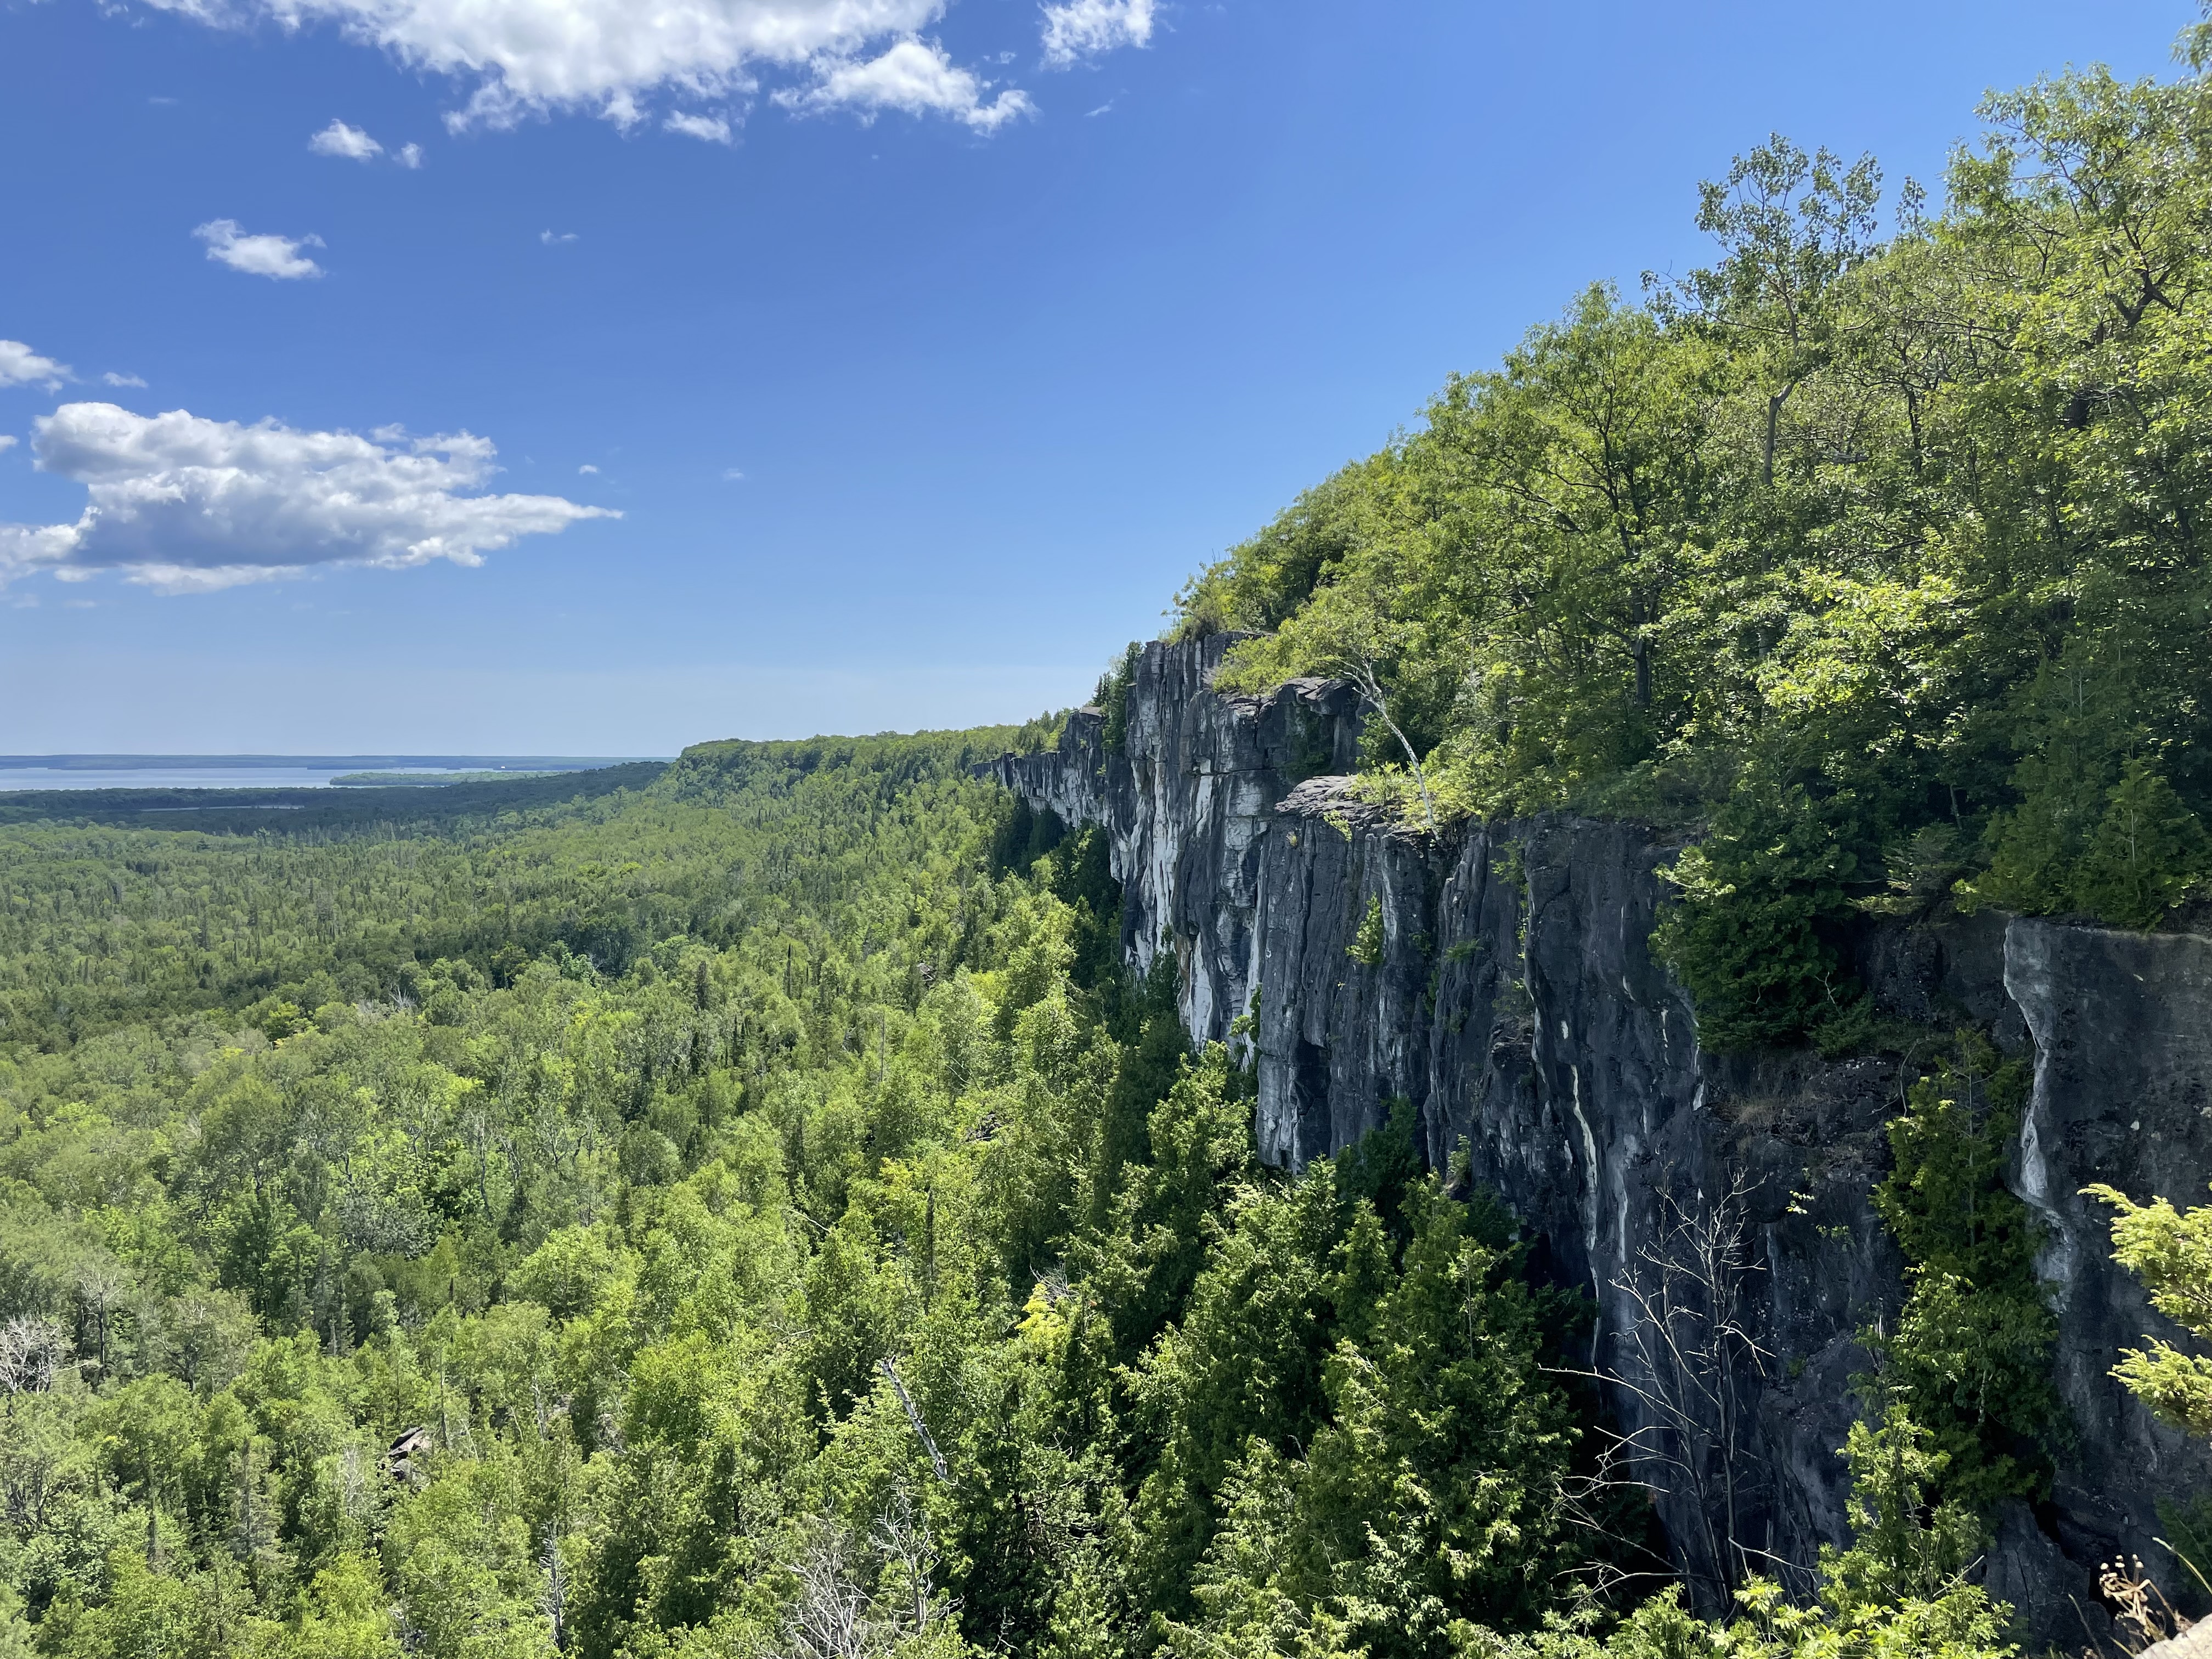 Cup and Saucer Trail; a view of a steep cliff face covered in lush green forest, dropping down into a broad green forested valley below, under a brilliant blue sky. 